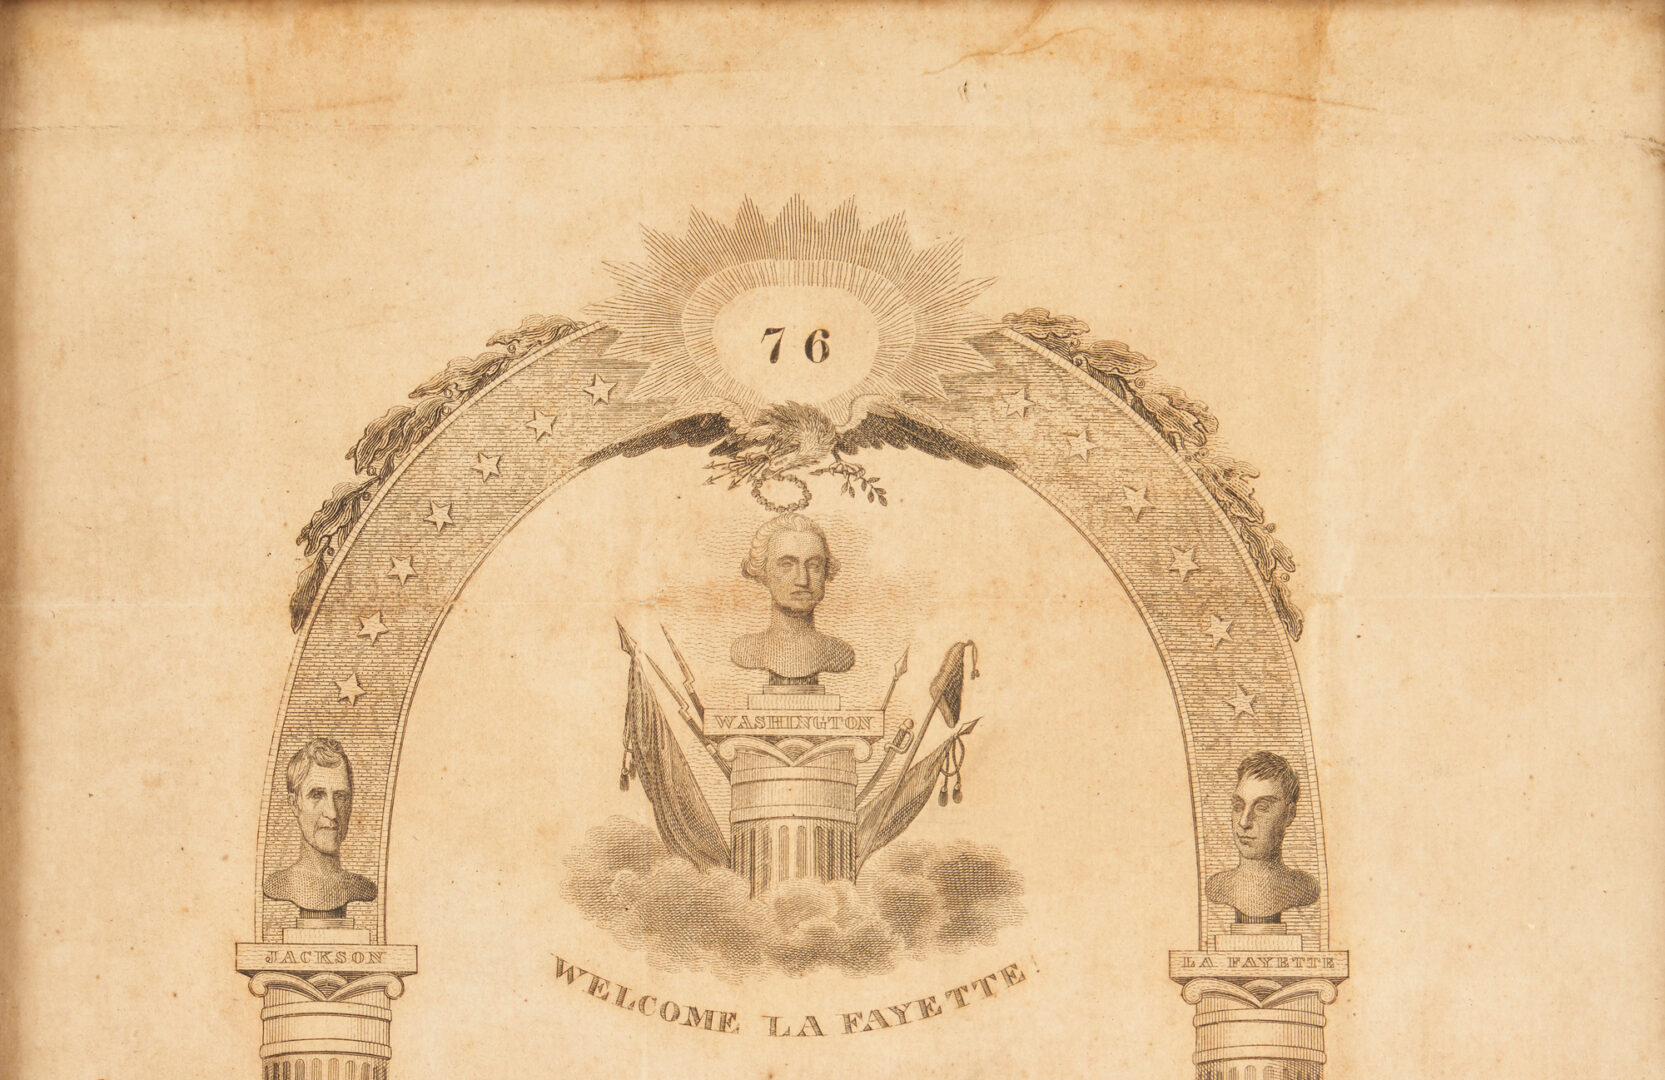 Lot 638: AJ Donelson's Invitation to Lafayette Ball in Nashville 1825, des. by Ralph Earl